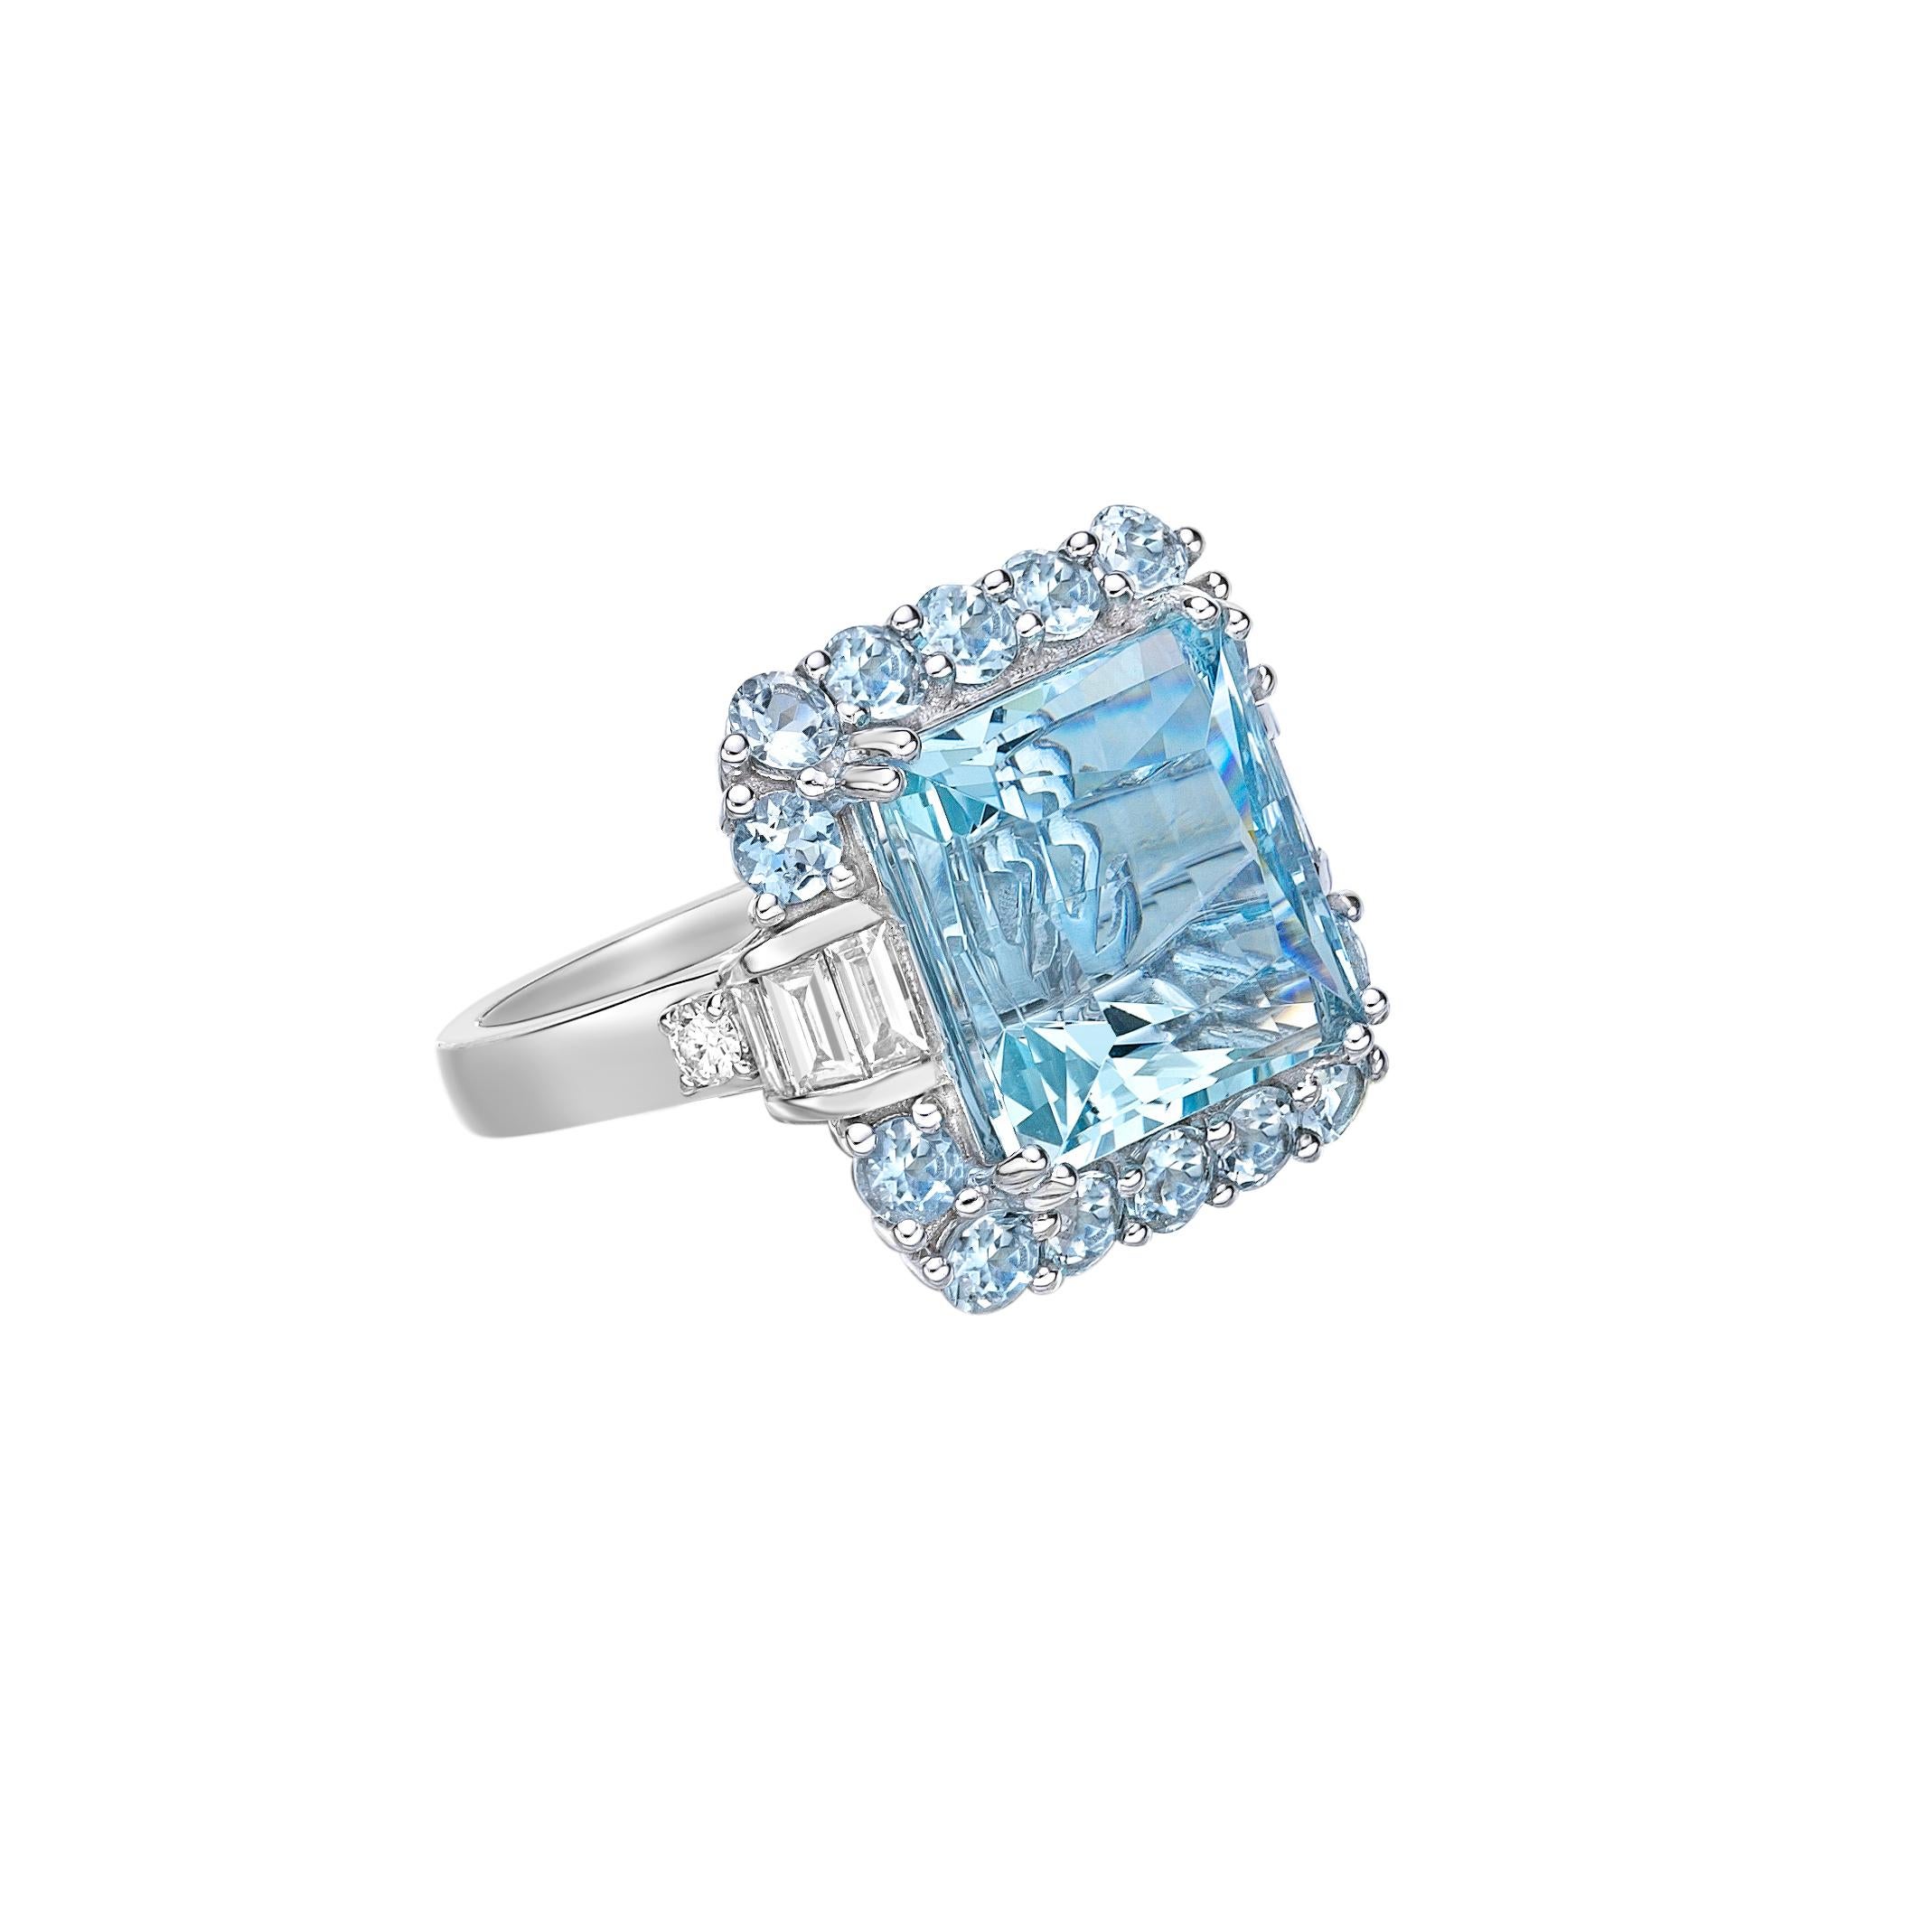 This collection features an array of aquamarines with an icy blue hue that is as cool as it gets! Accented with diamonds these rings are made in white gold and present a classic yet elegant look. 

11.8 Carat Aquamarine, Rhodolite and Diamond Ring